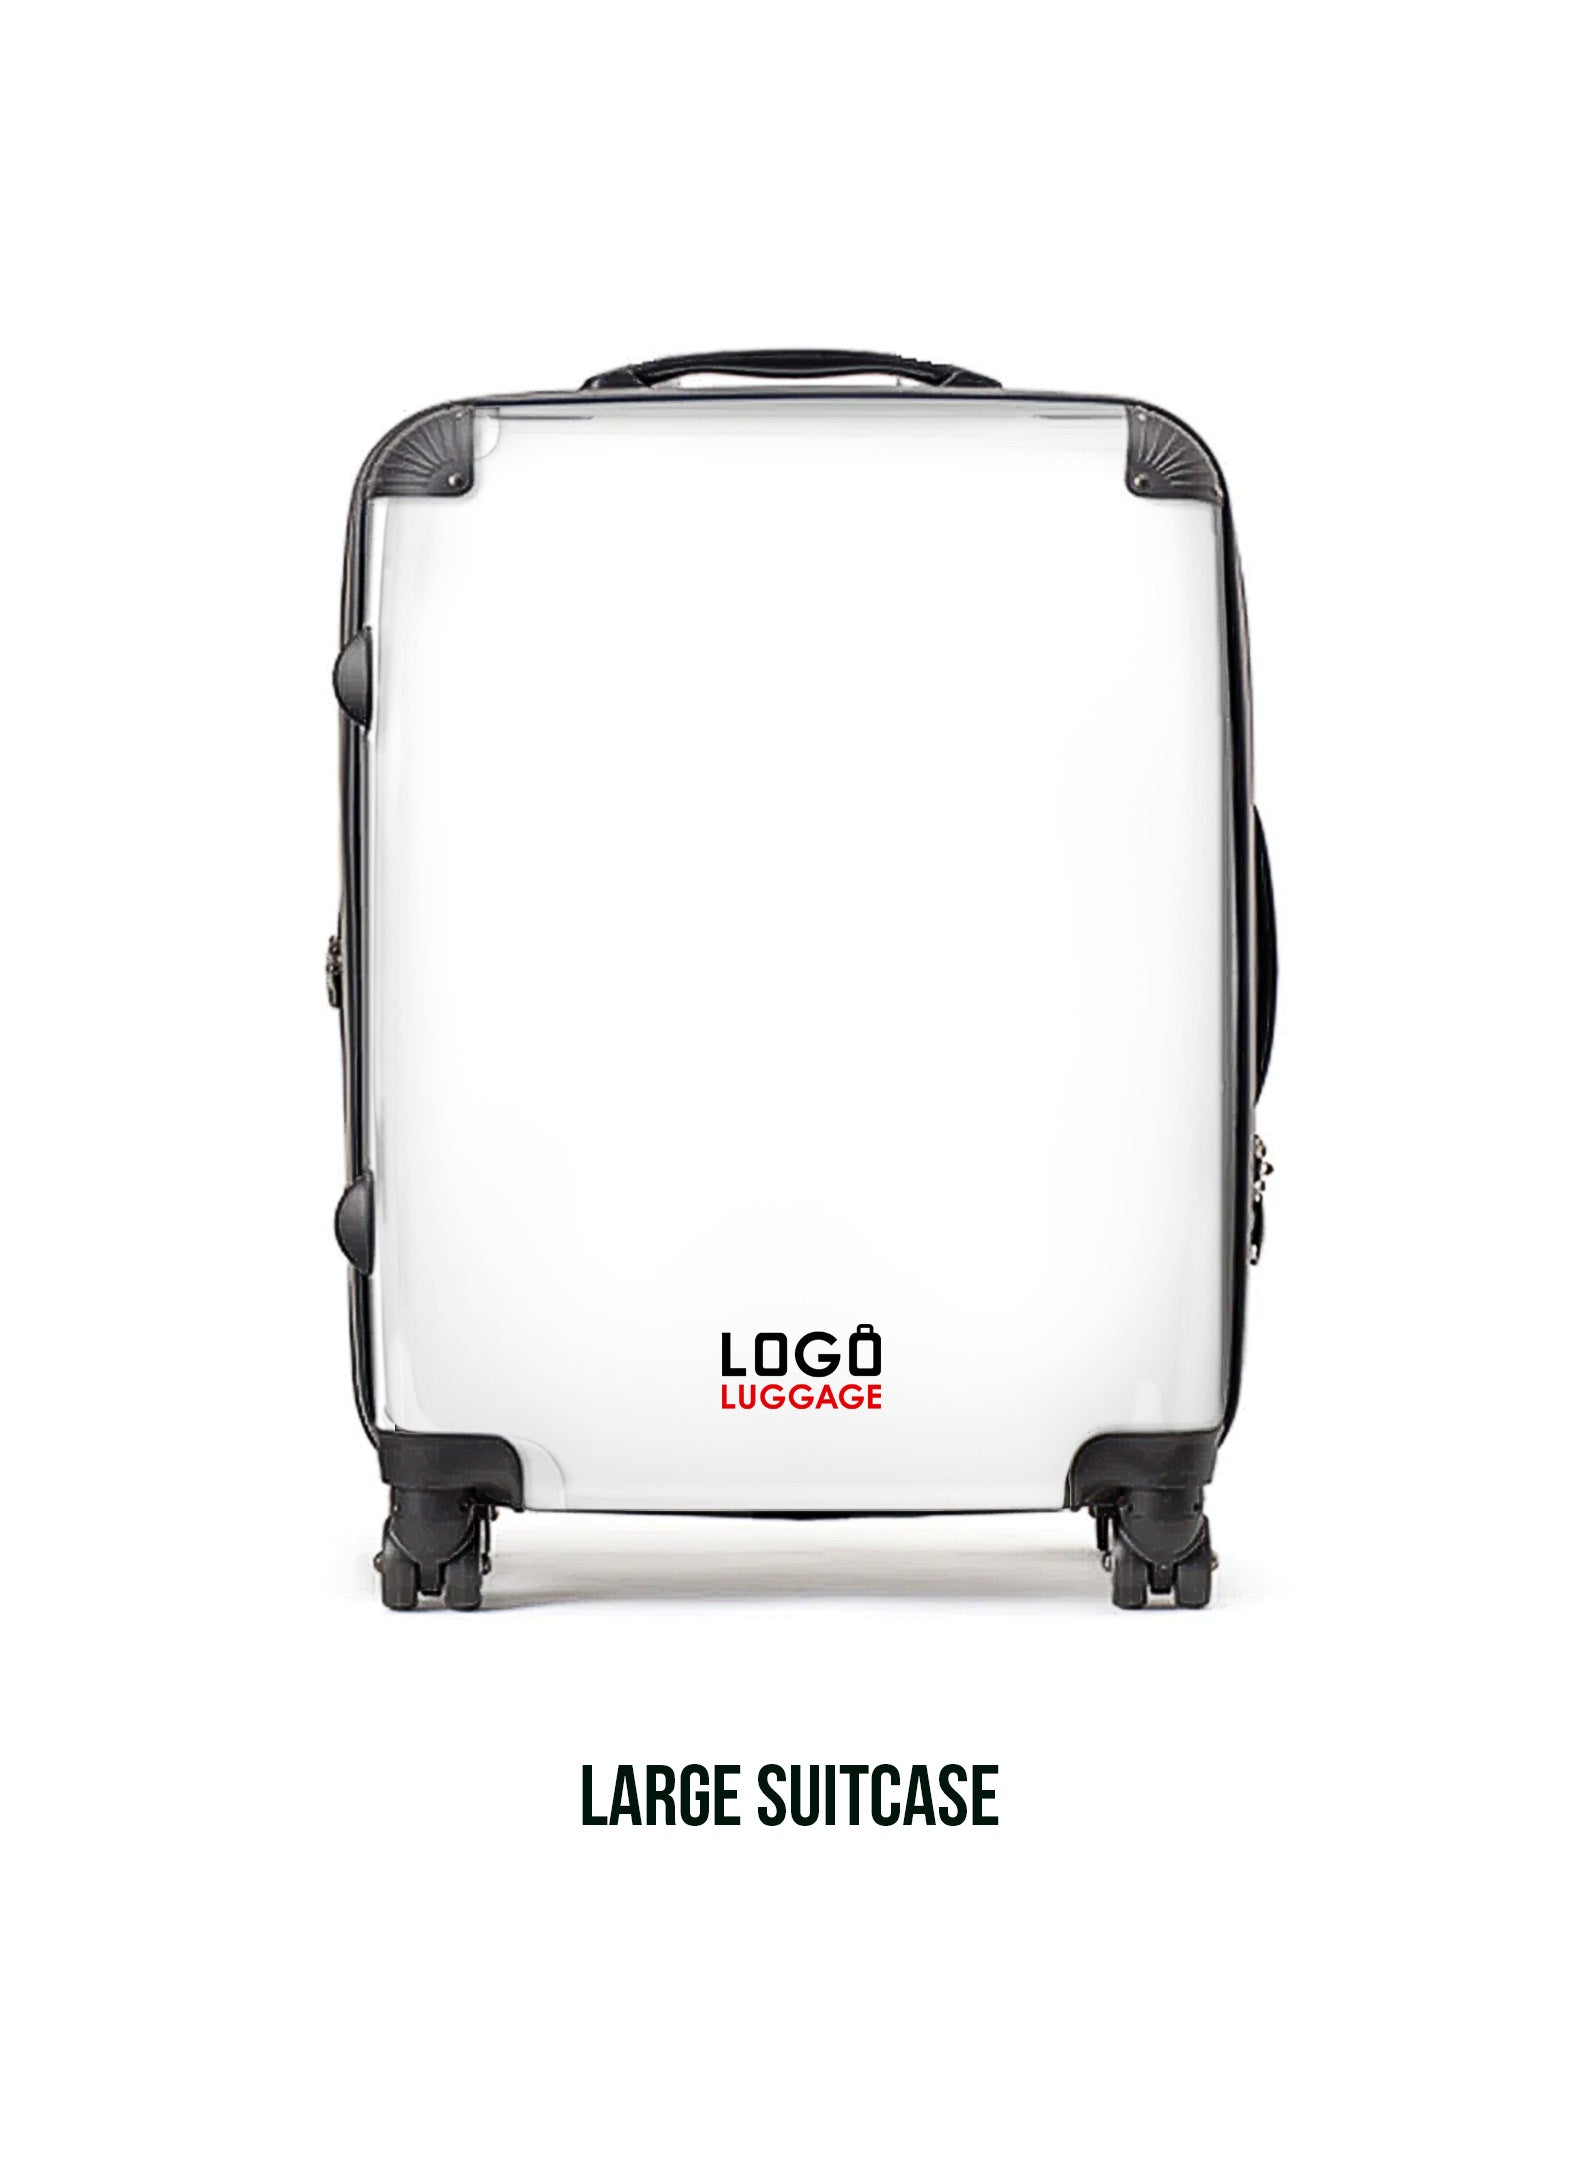 Create Your Own Luggage